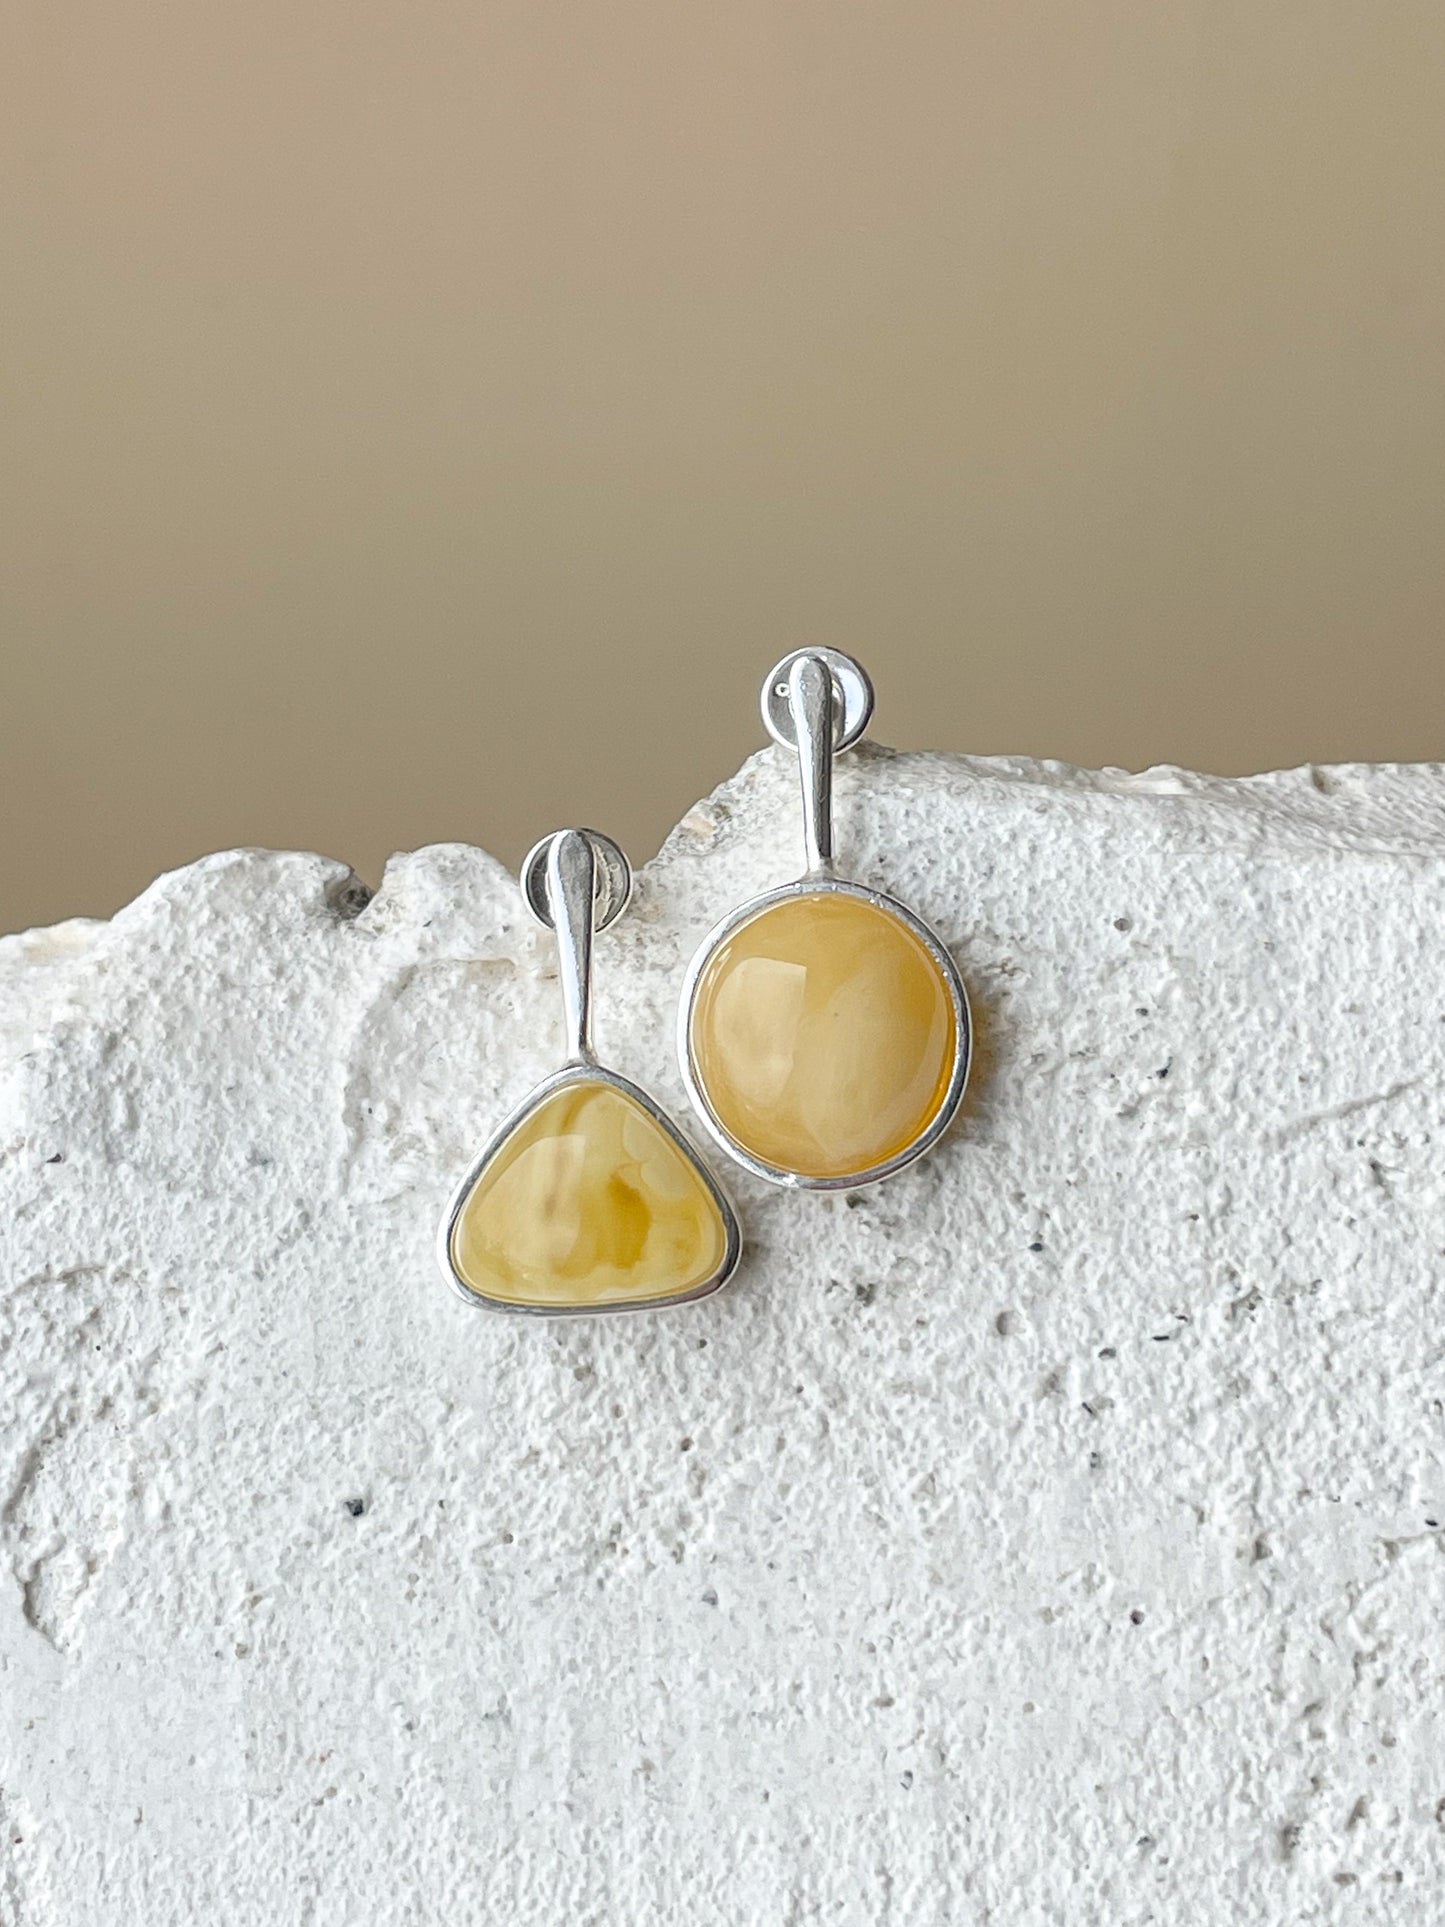 Matte amber stud earrings - Sterling silver - Mismatched earrings collection